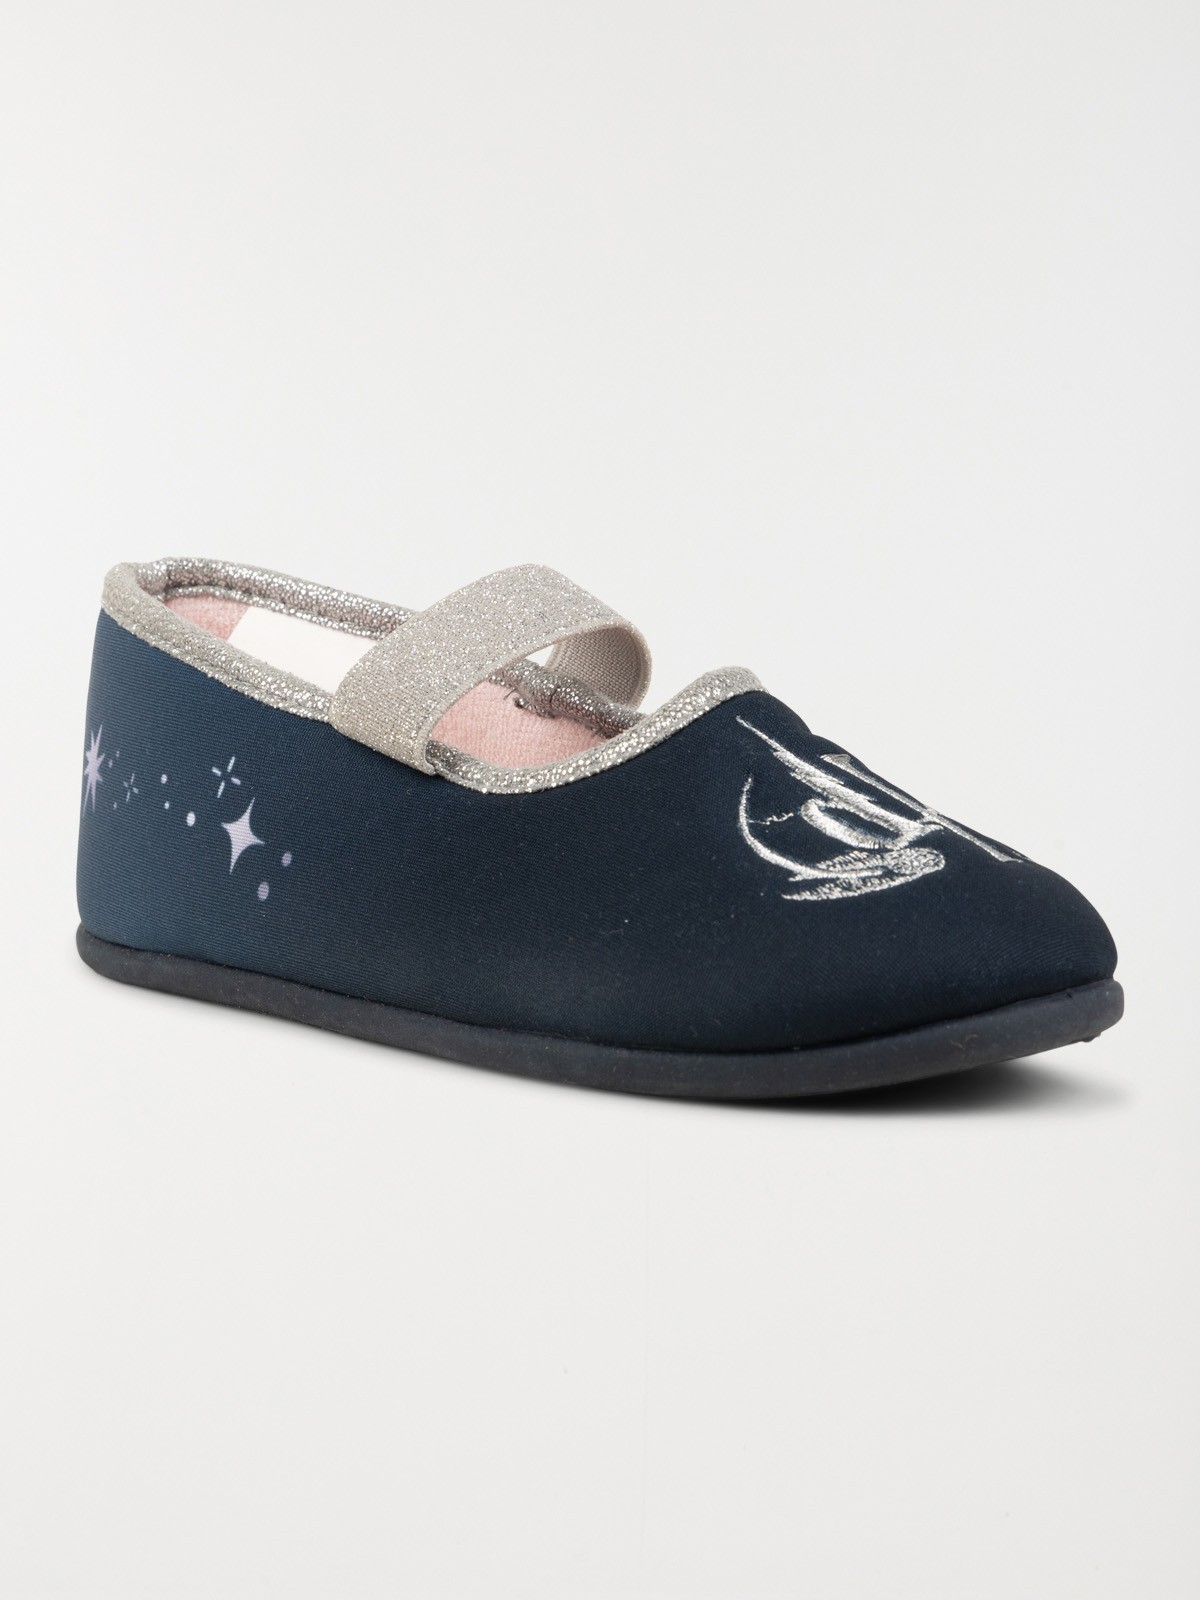 Chaussons chat princesse fille (31-35) - DistriCenter